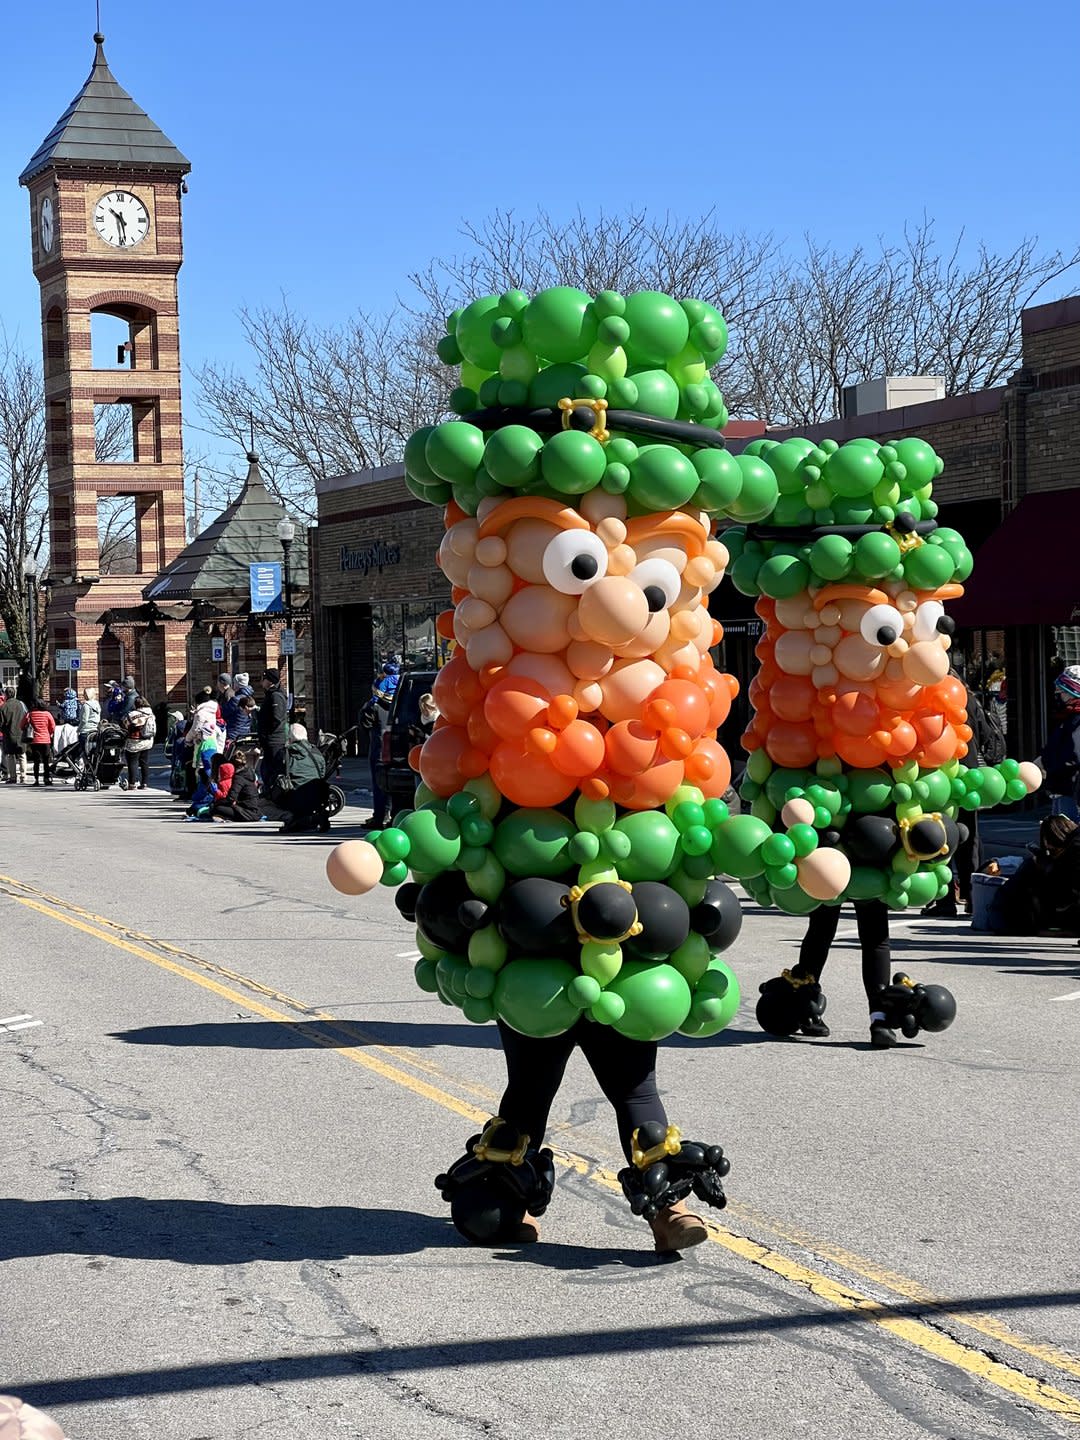 The St. Patrick's Day Parade